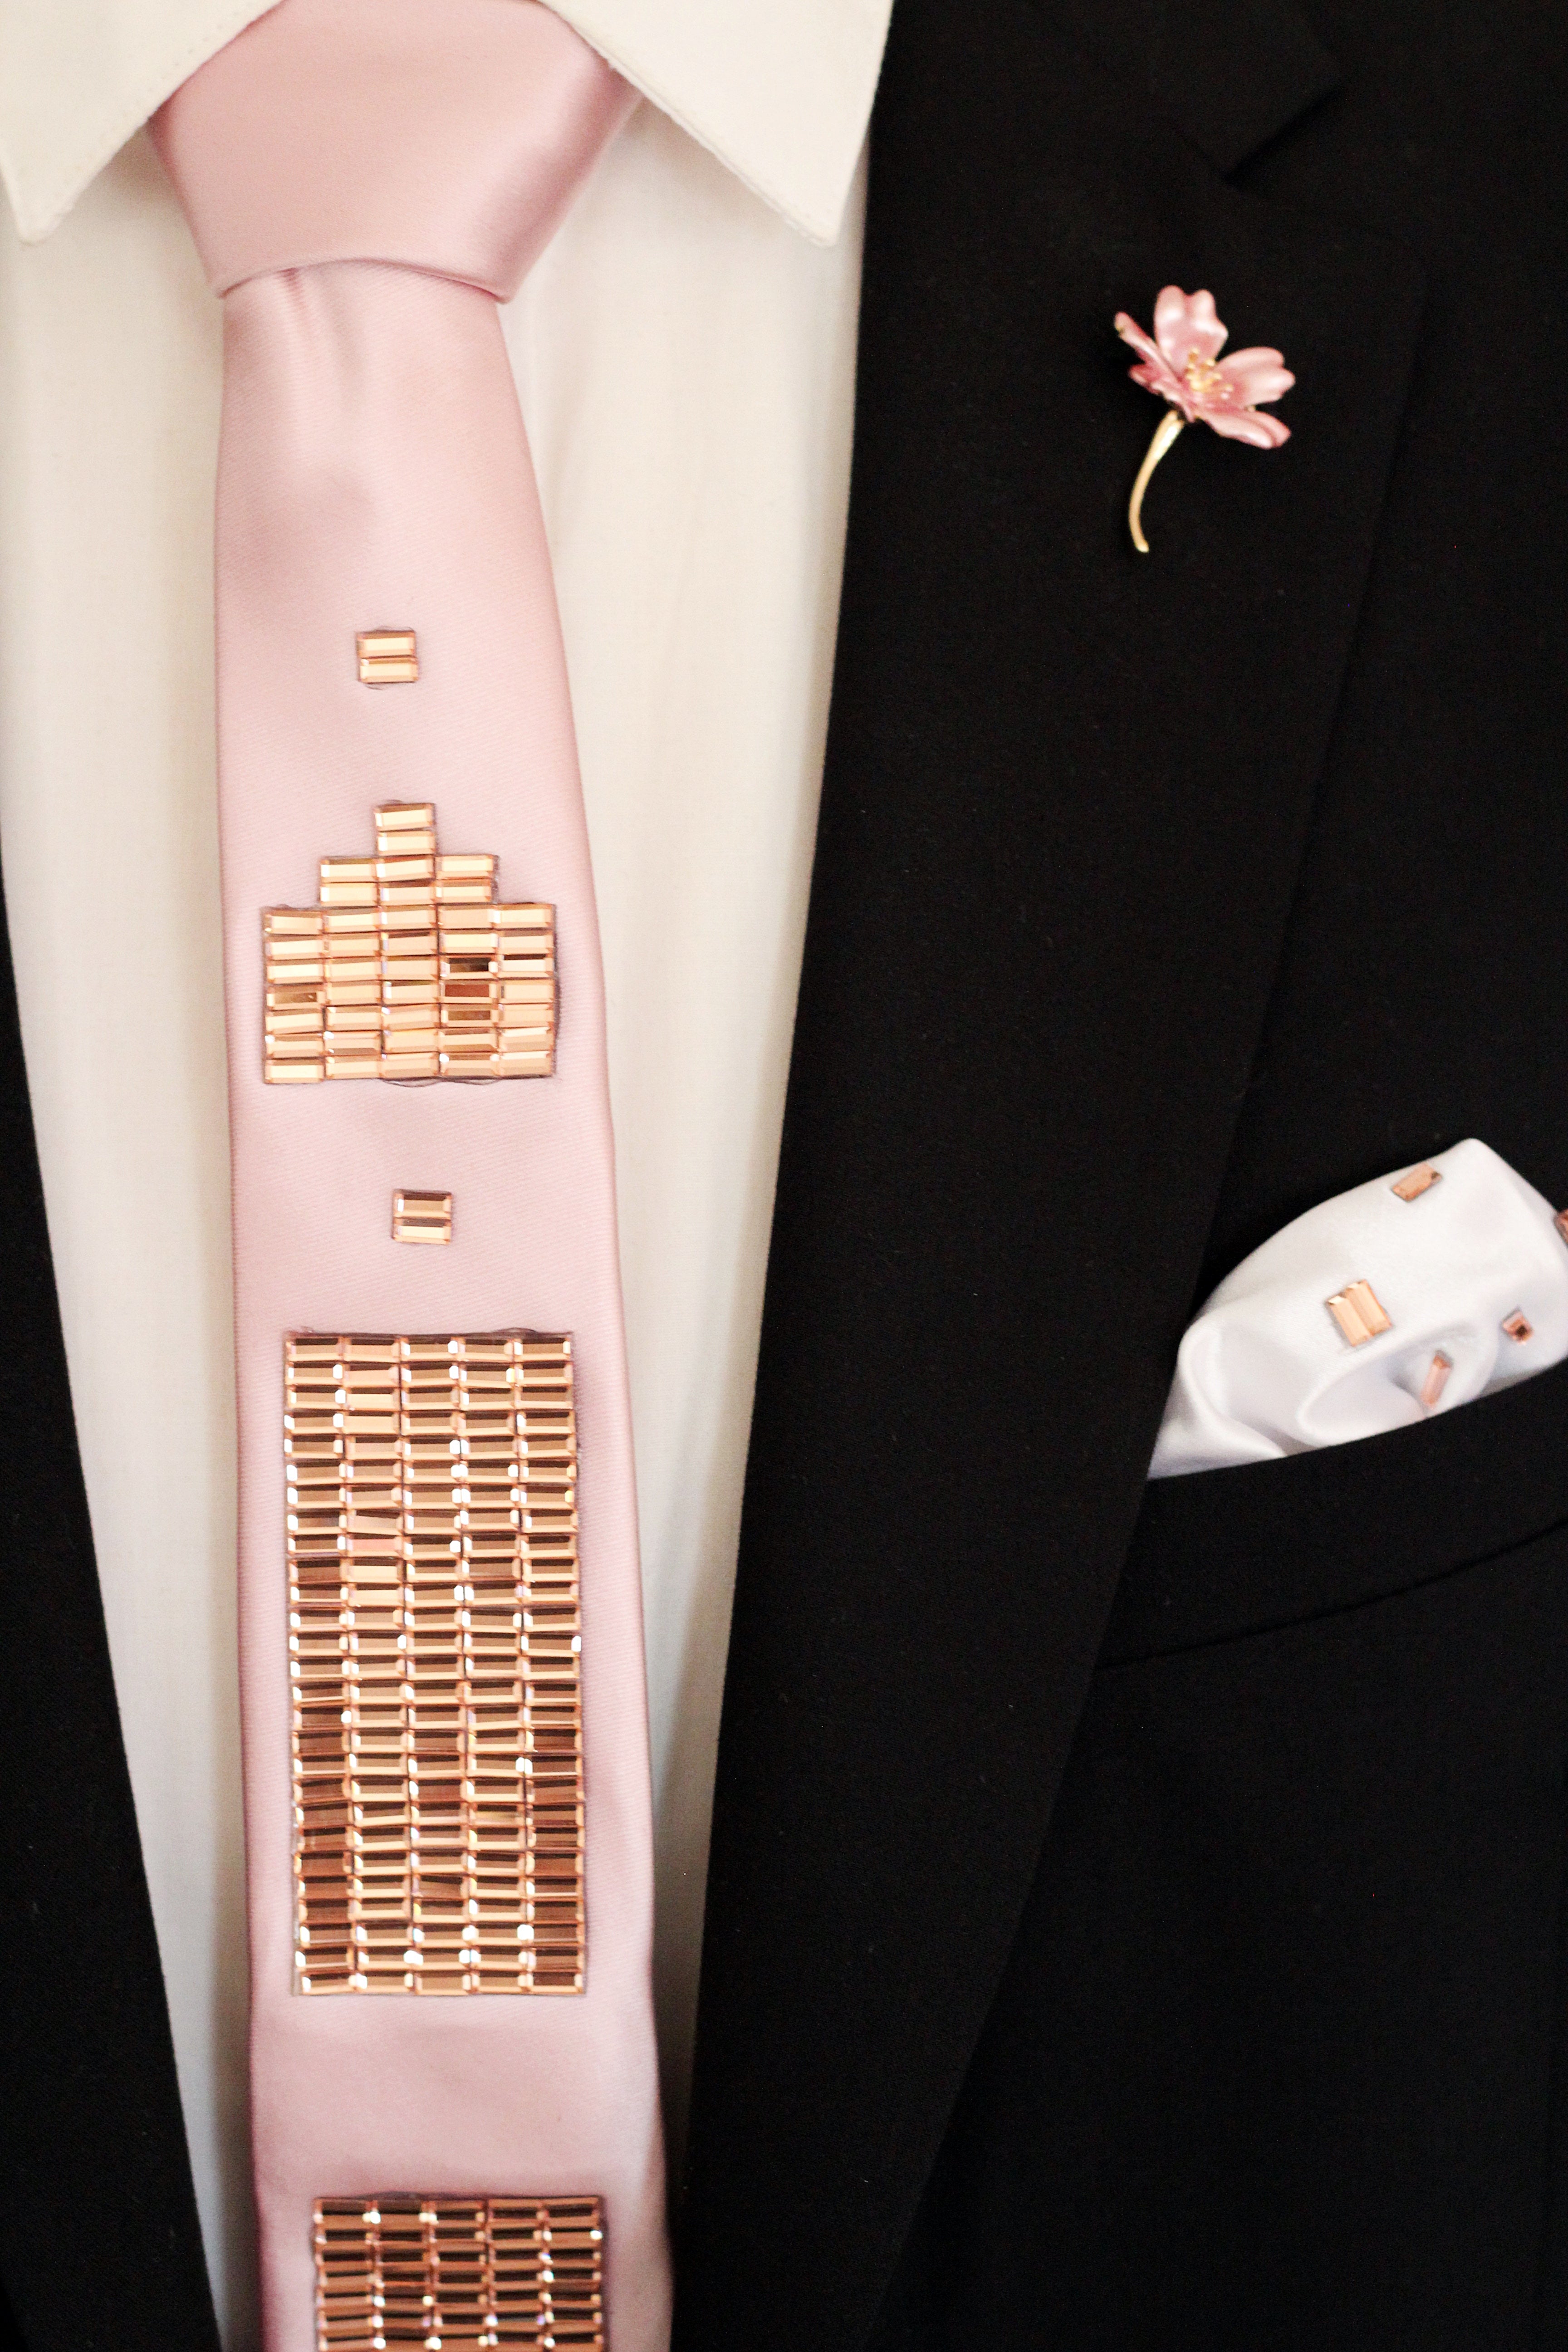 Louis Vuitton Pink Patterned Tie